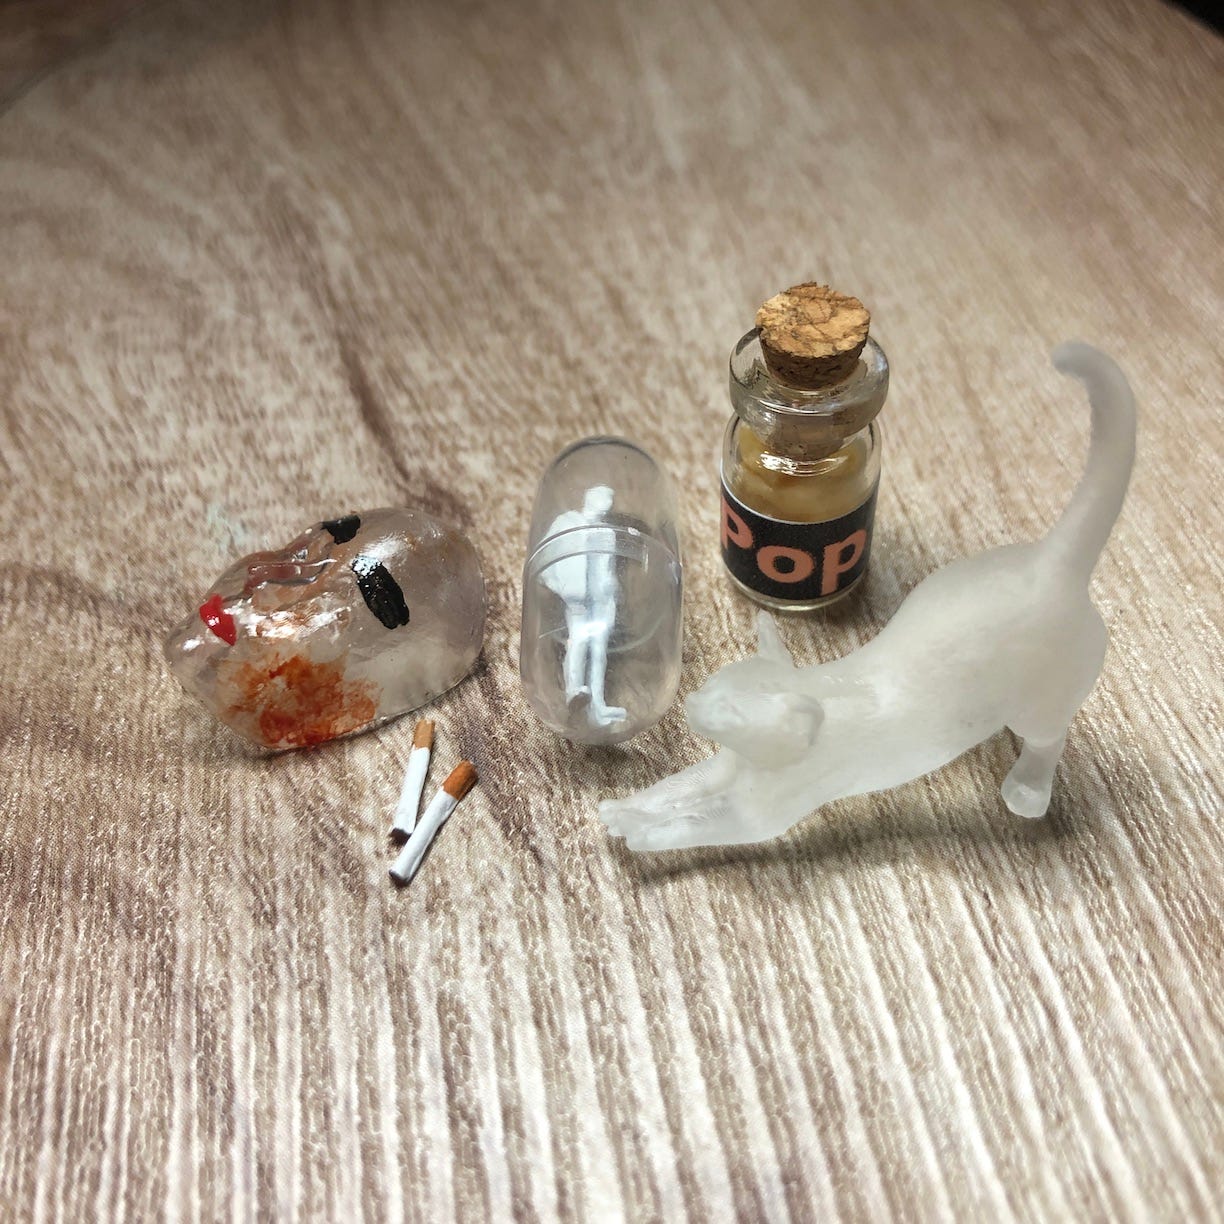 Miniature clear, bloody mask, ghost cat, cigarettes, person in a capsule, and jar of "pop" (which looks like peeled Caucasion skin) on a gray wooden table